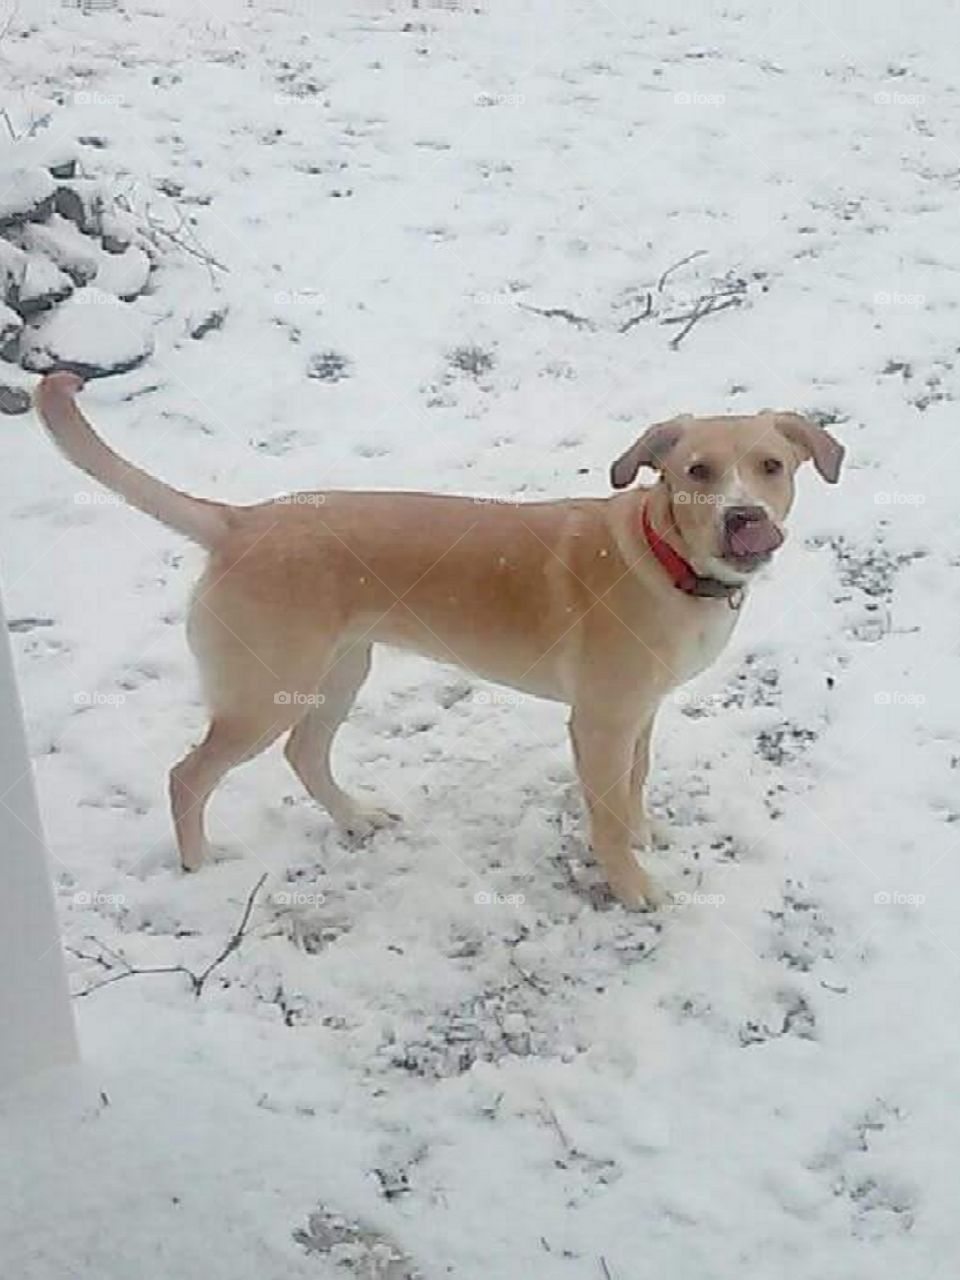 My puppy Lucy eating snow